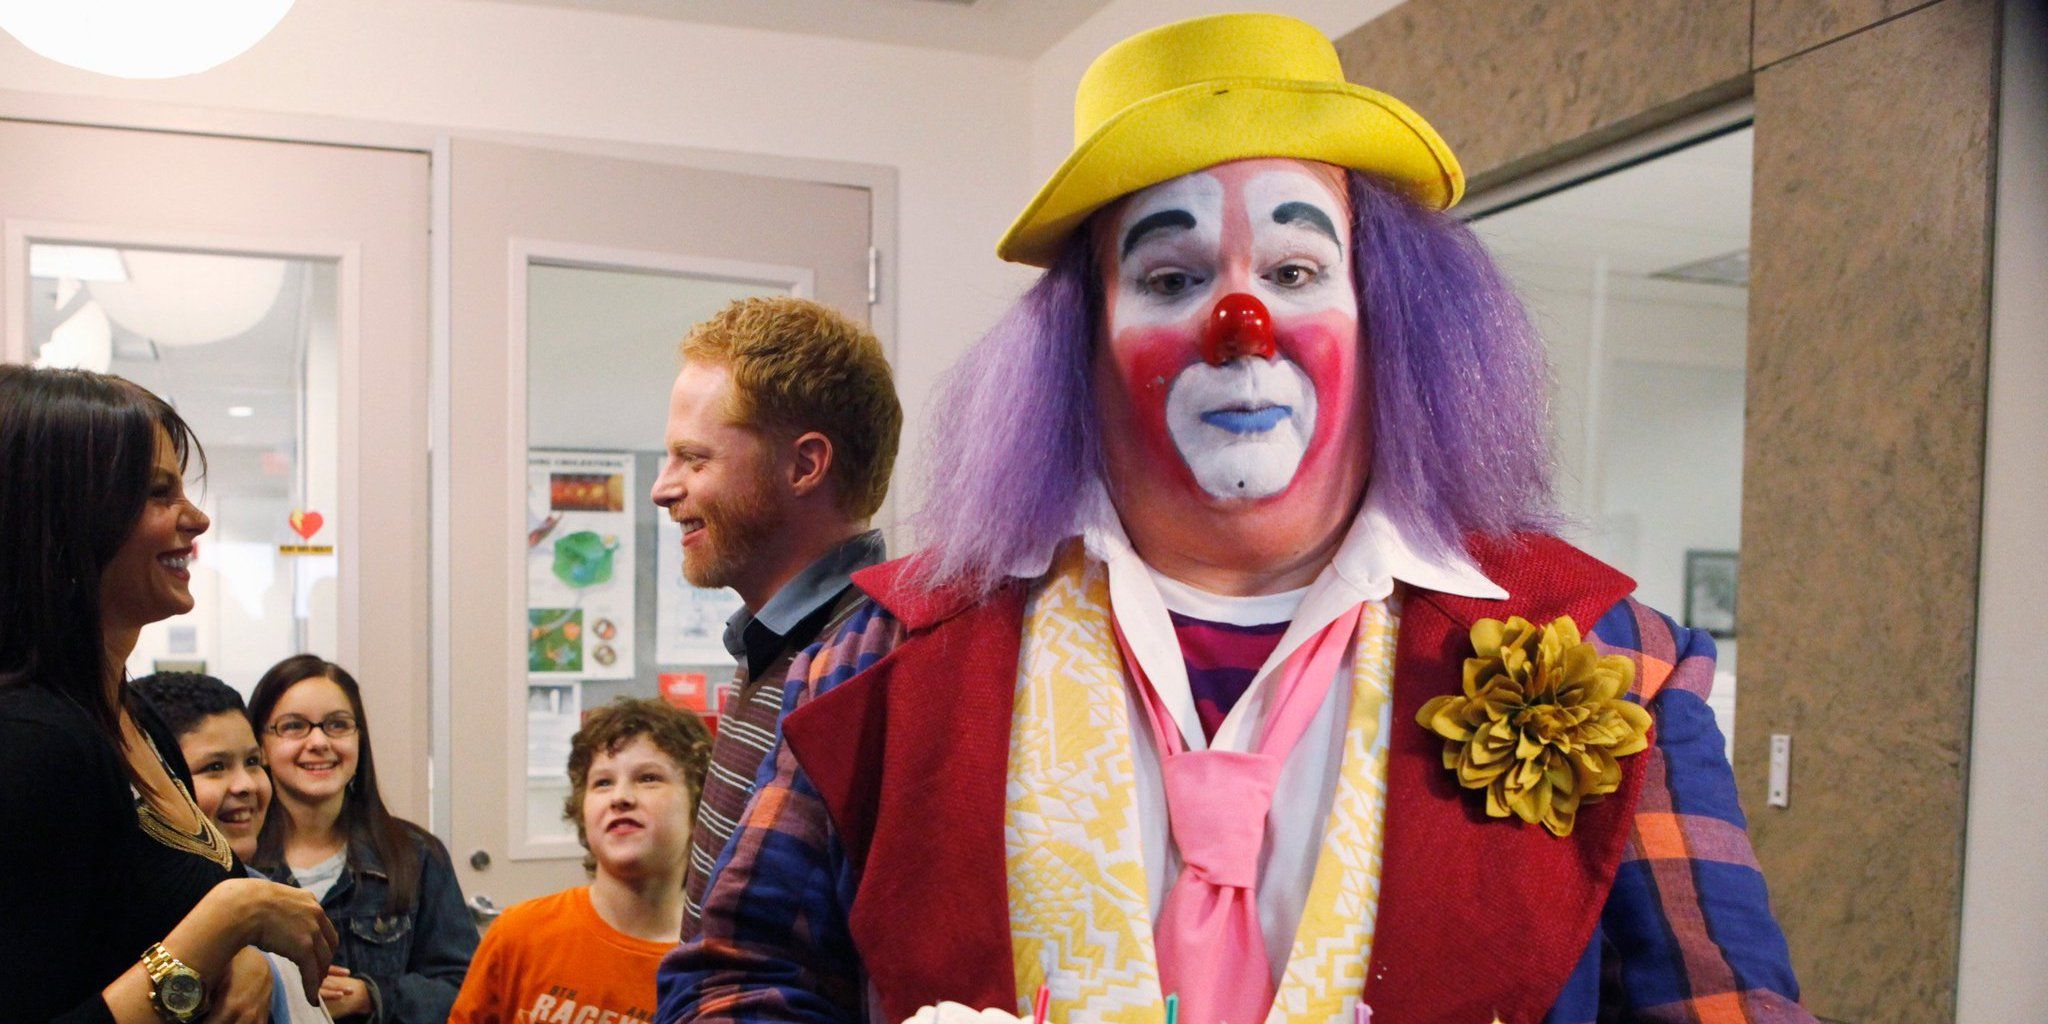 Cam dressed up as a clown on Modern Family